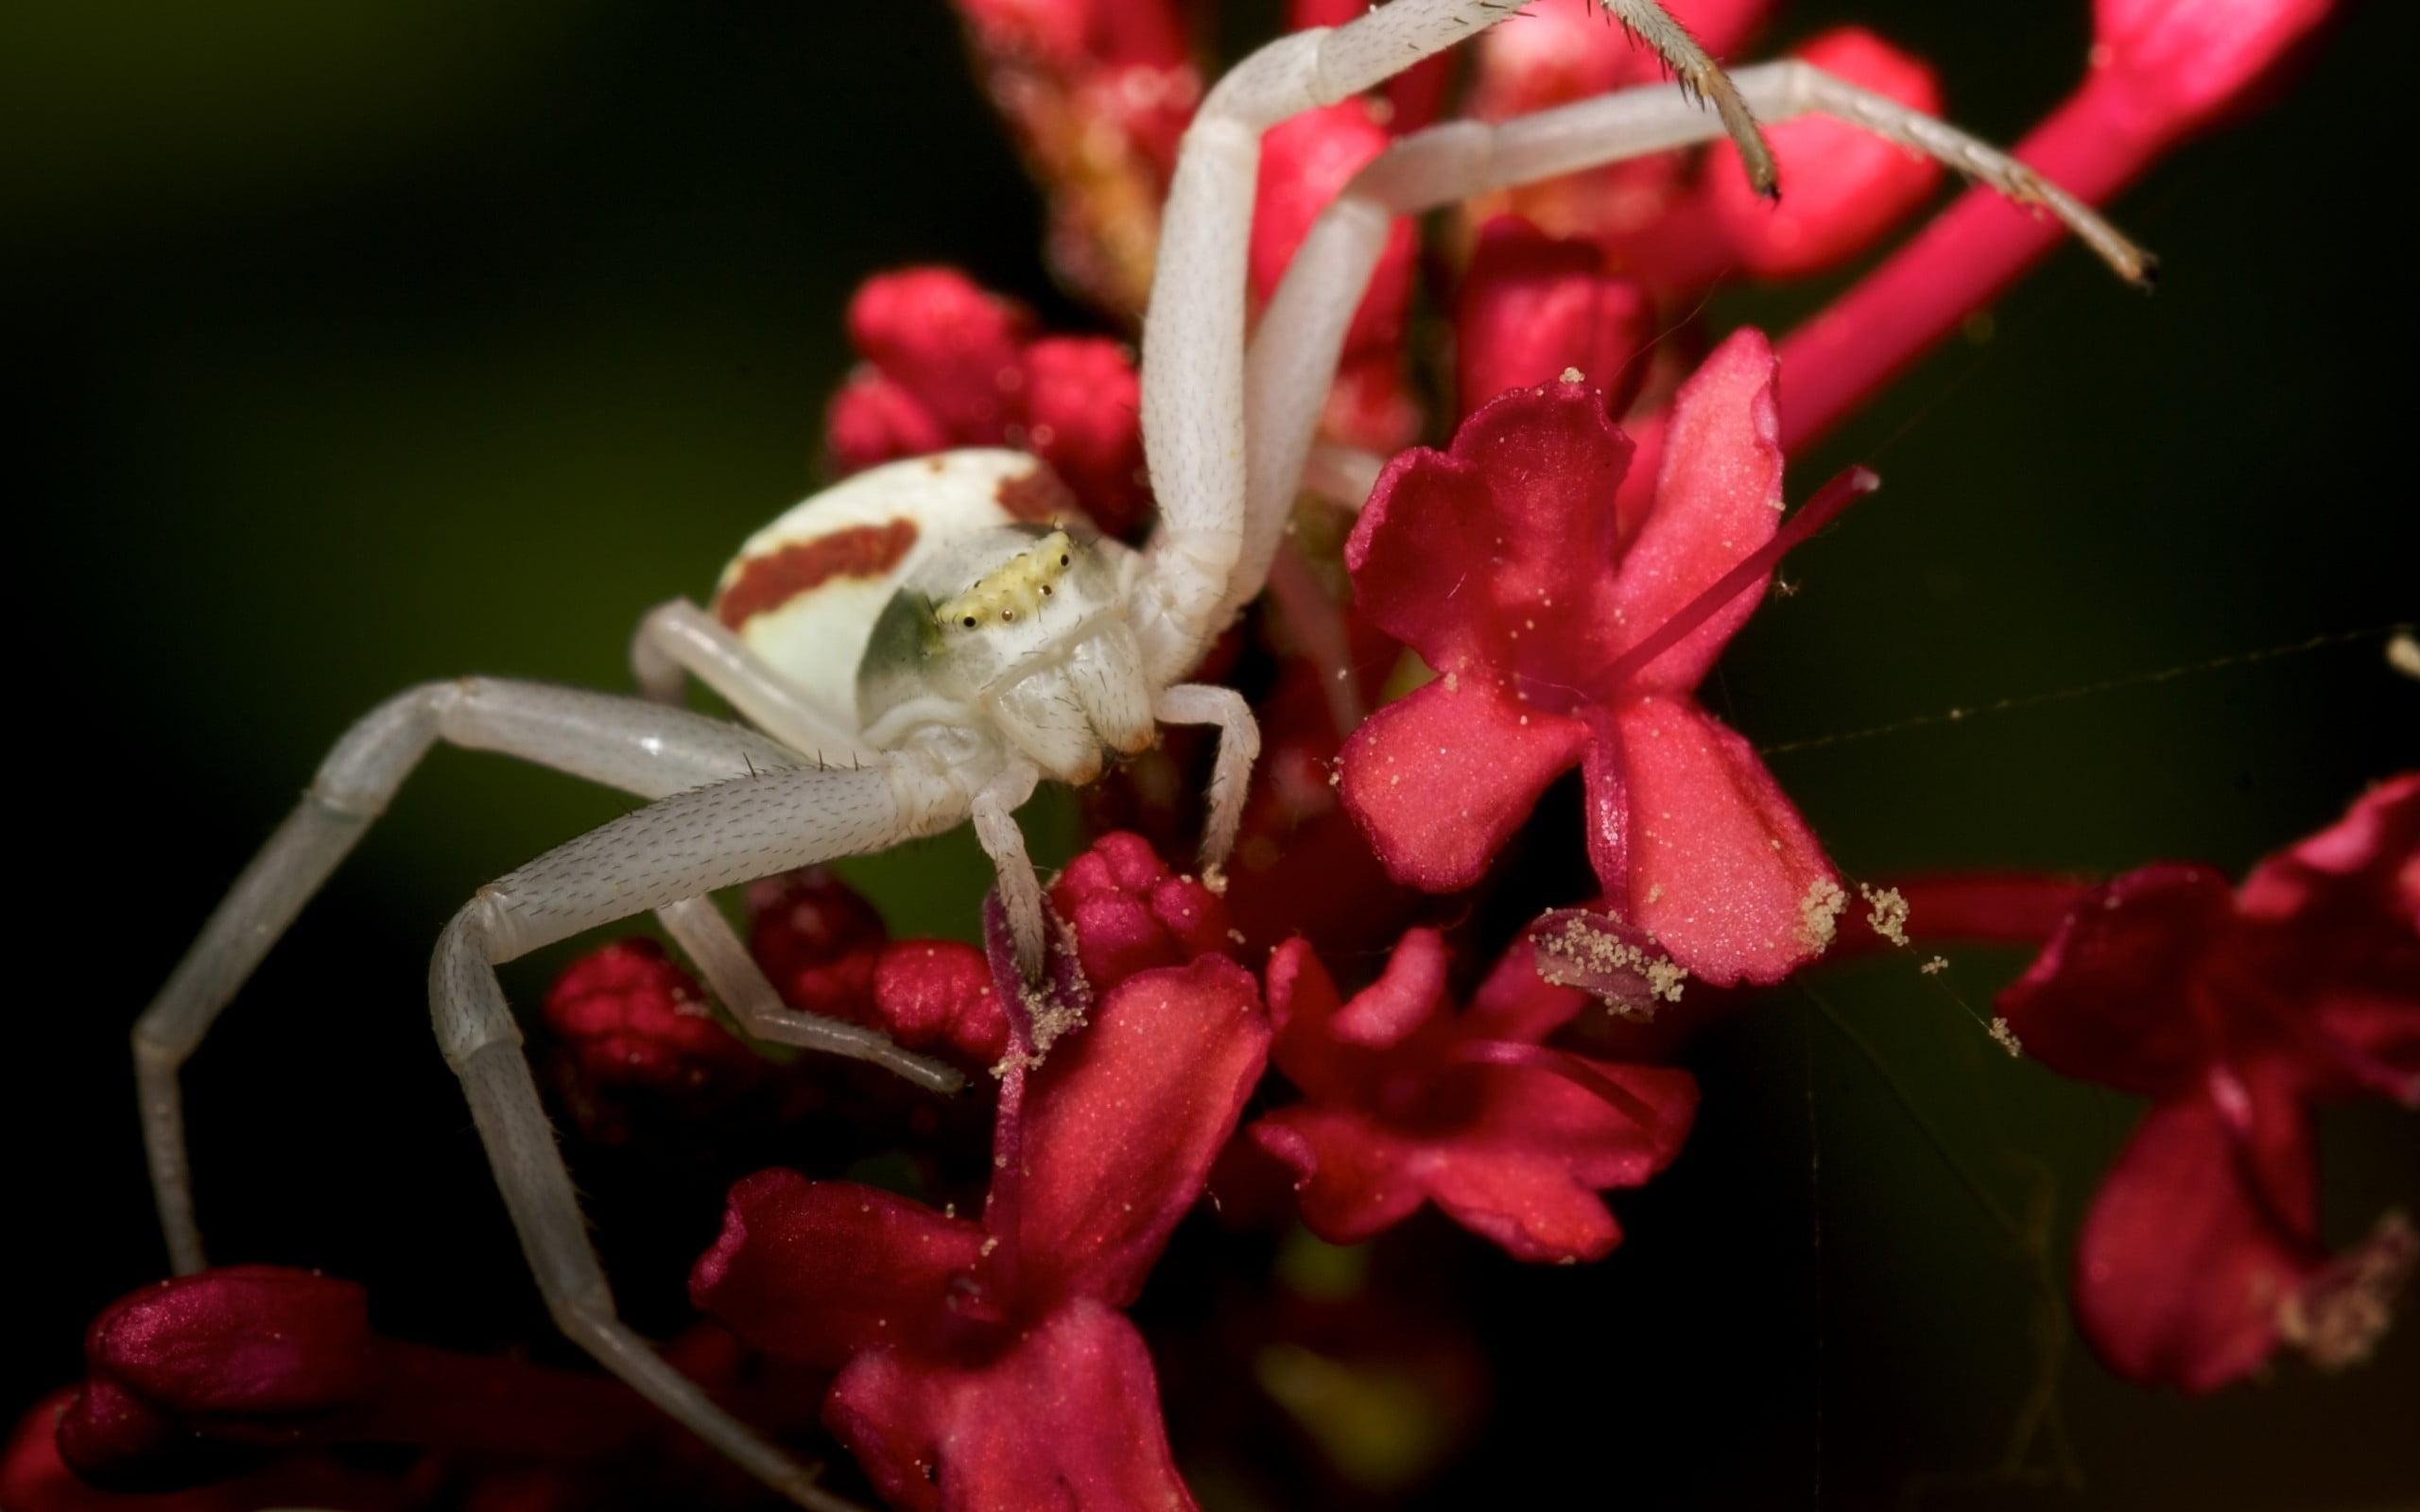 White crab spider perched on red petaled flower in closeup